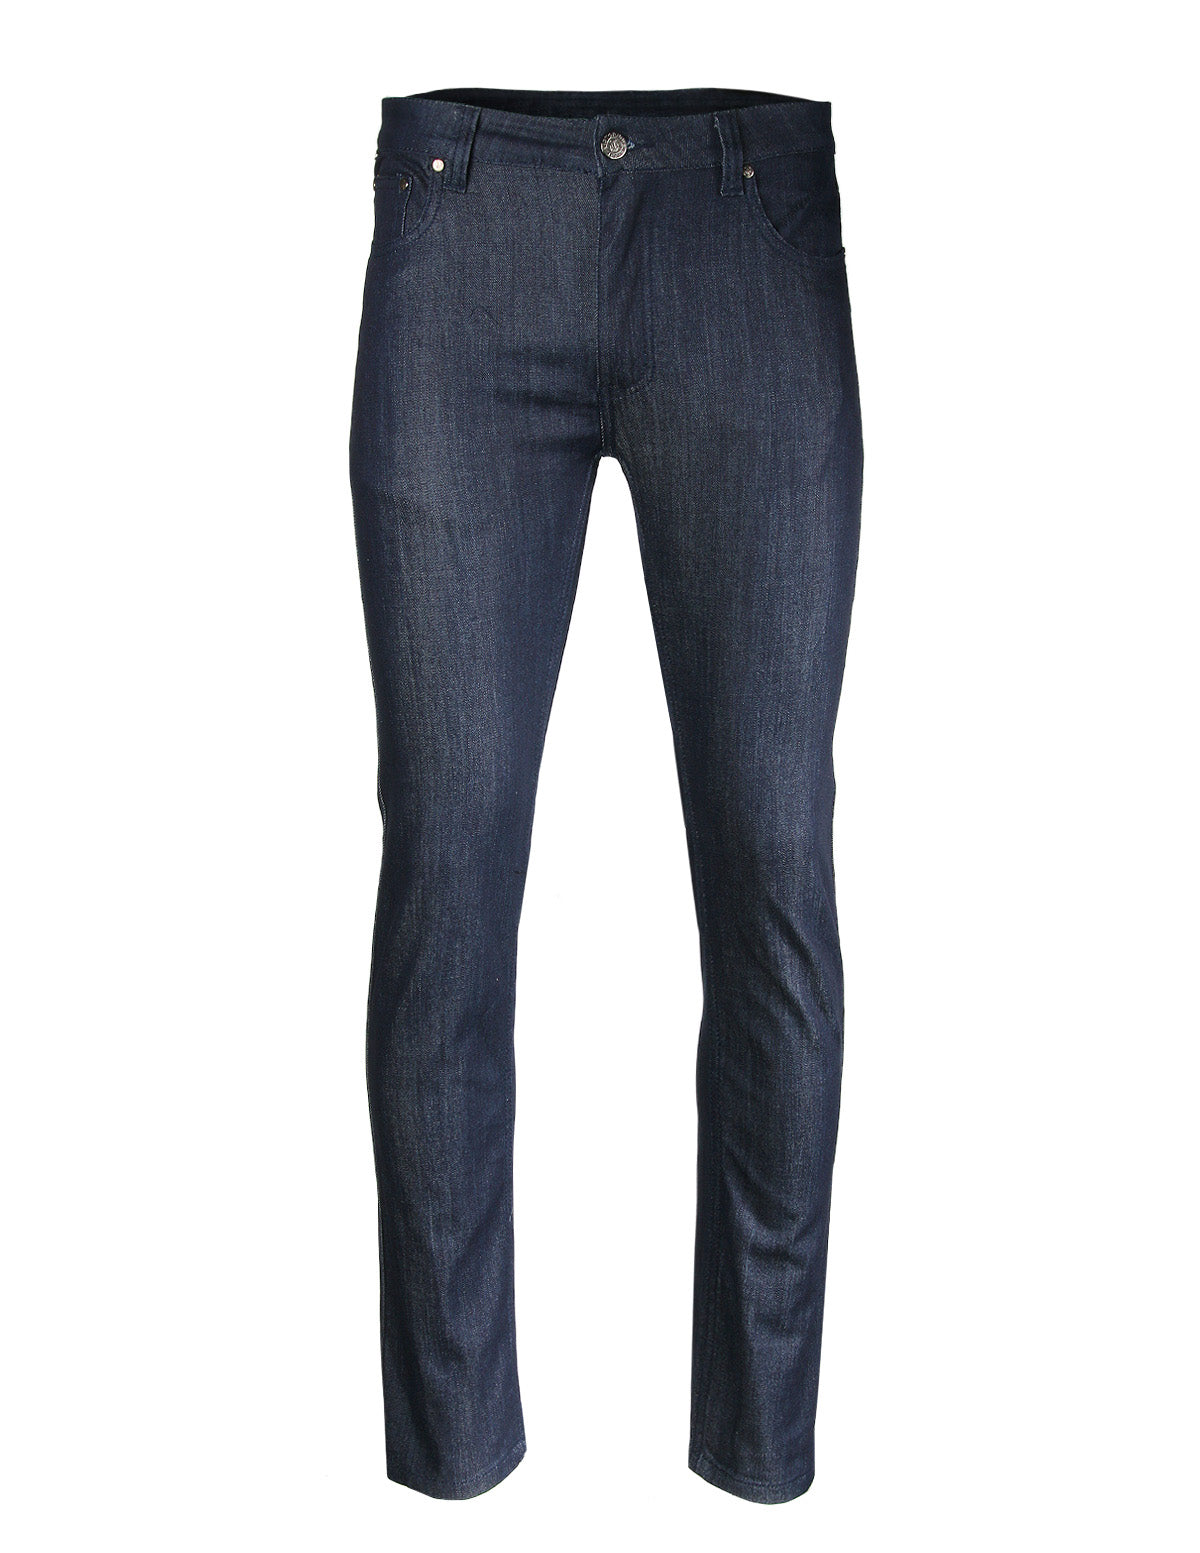 Men's Five-Pockets and Denim trousers